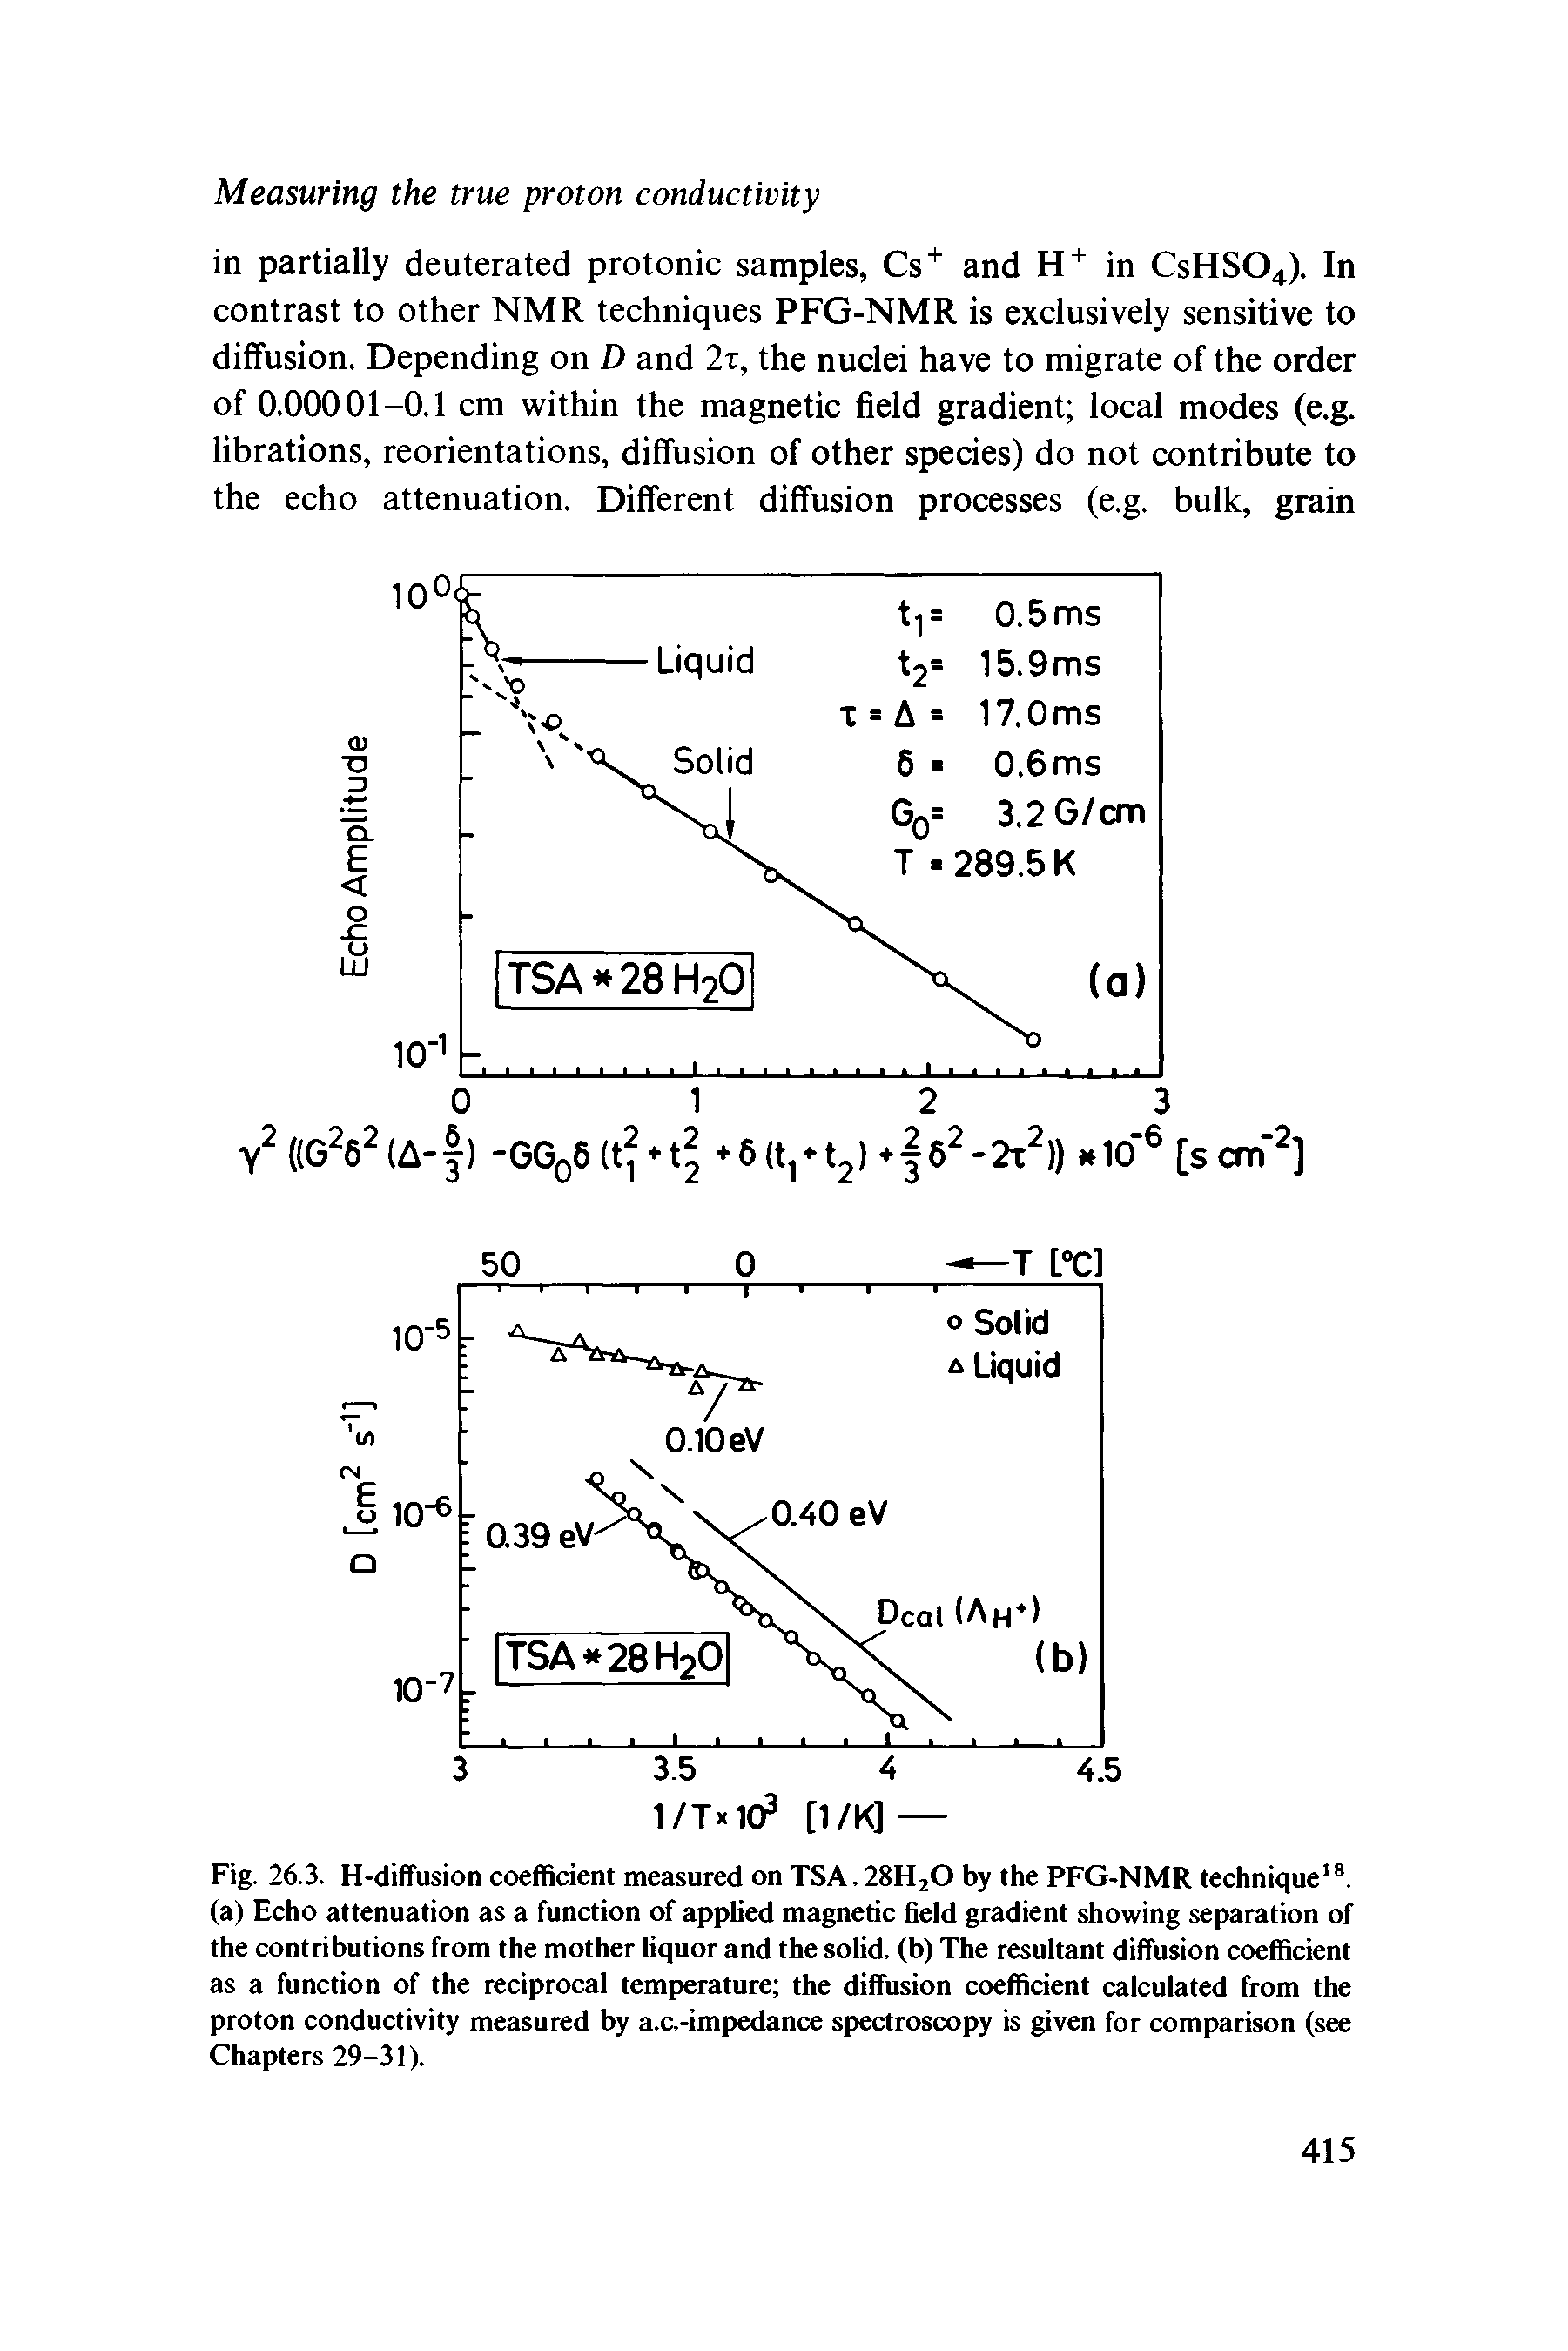 Fig. 26.3. H-difTusion coefficient measured on TSA.28H2O by the PFG-NMR technique , (a) Echo attenuation as a function of applied magnetic field gradient showing separation of the contributions from the mother liquor and the solid, (b) The resultant diffusion coefficient as a function of the reciprocal temperature the diffusion coefficient calculated from the proton conductivity measured by a.c.-impedance spectroscopy is given for comparison (see Chapters 29-31).